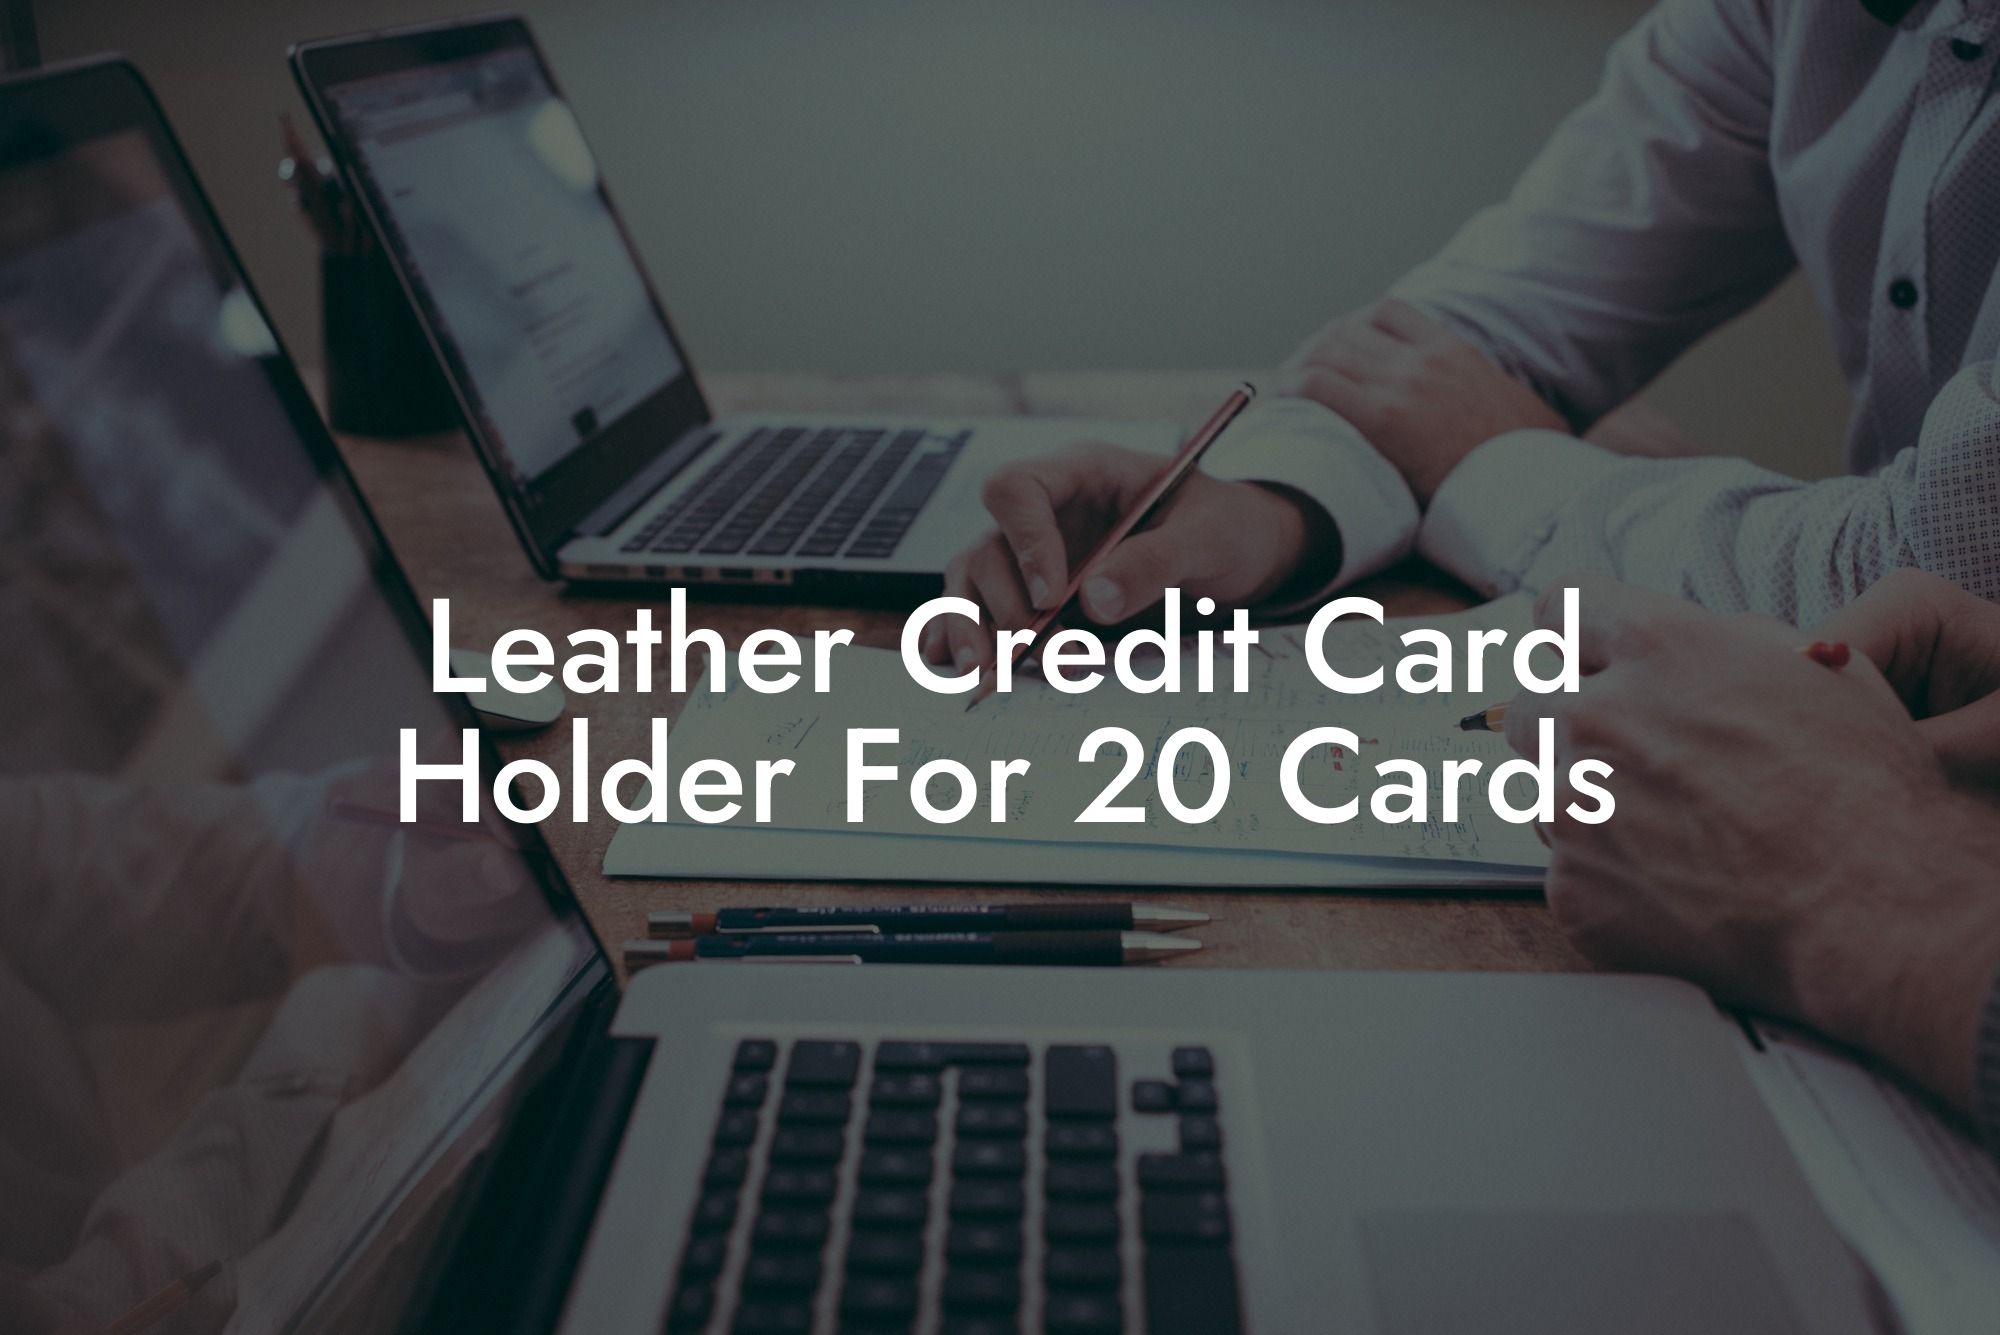 Leather Credit Card Holder For 20 Cards